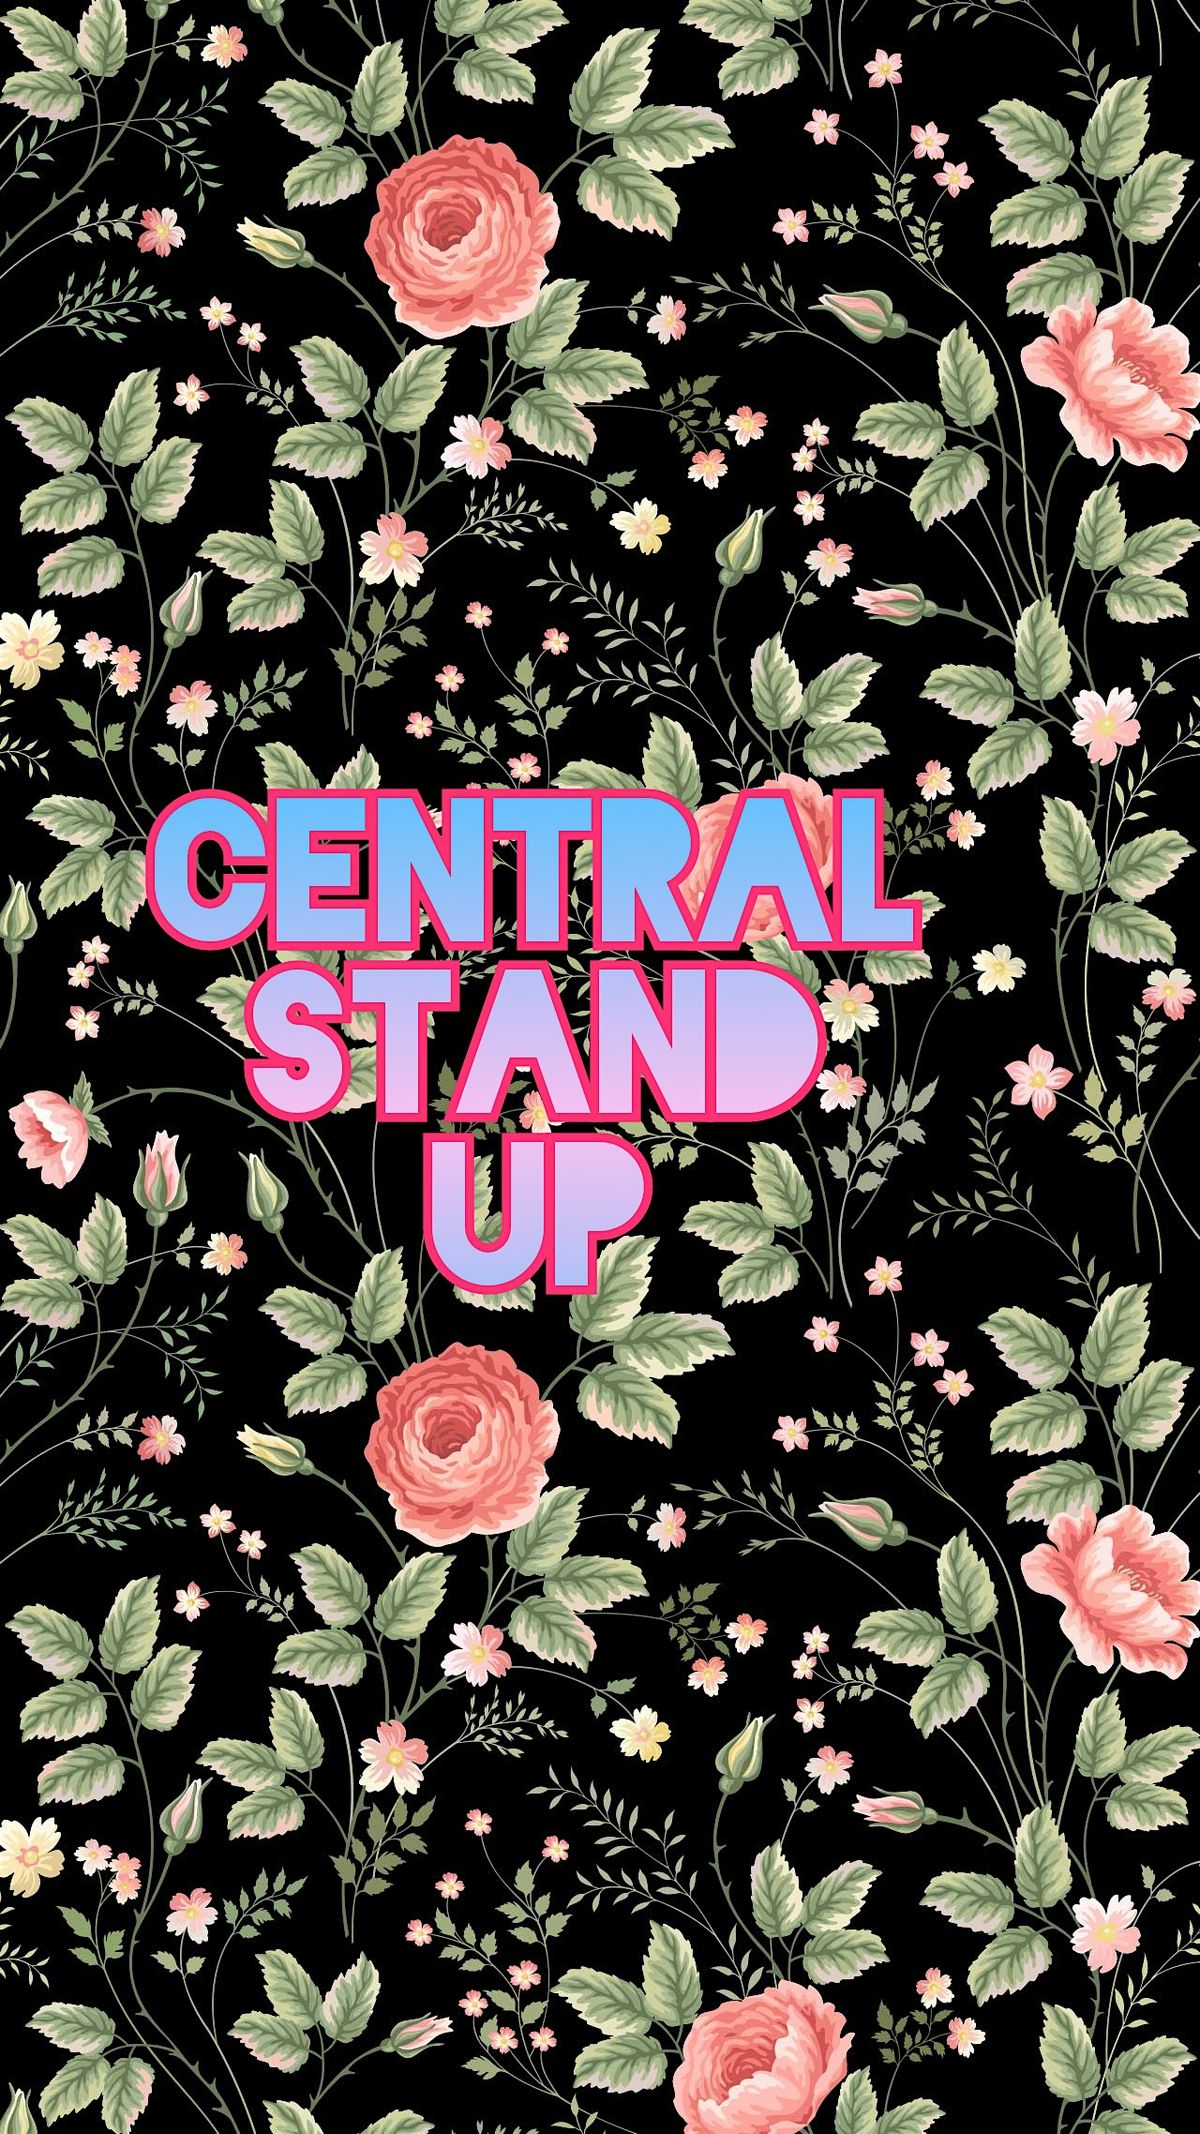 Central Stand Up 9: The Naturals